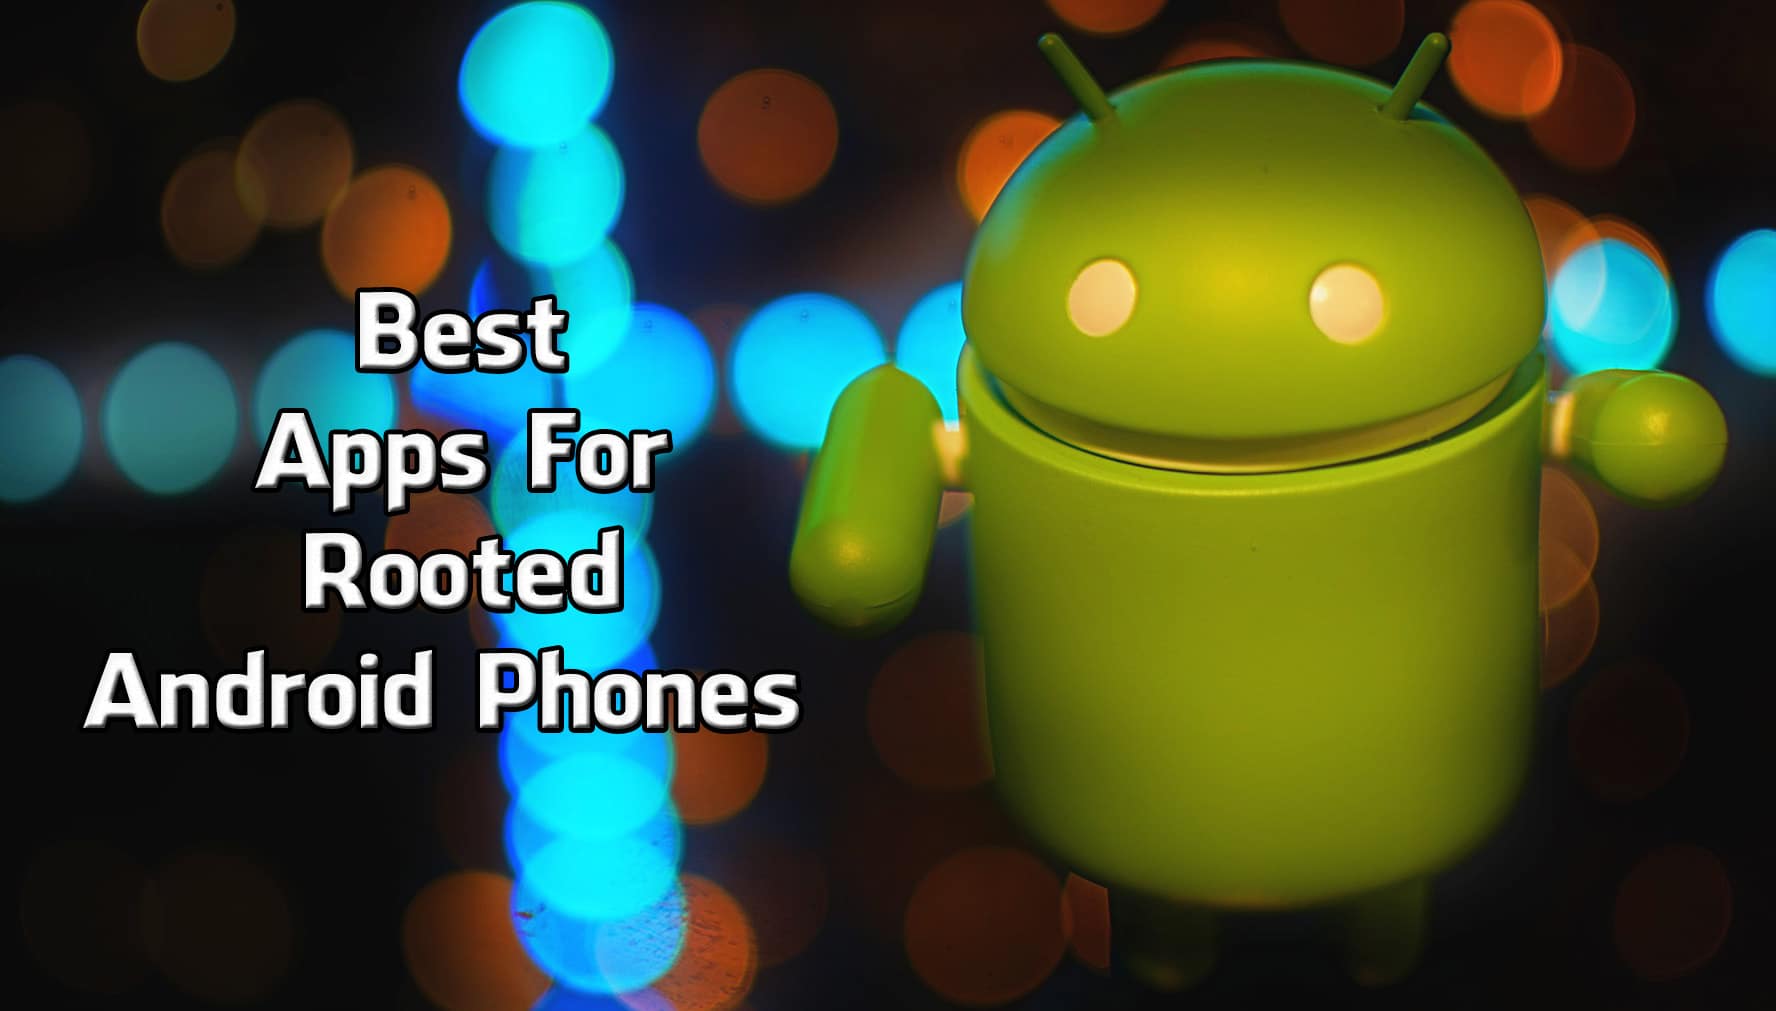 Best Apps For Rooted Android Phones